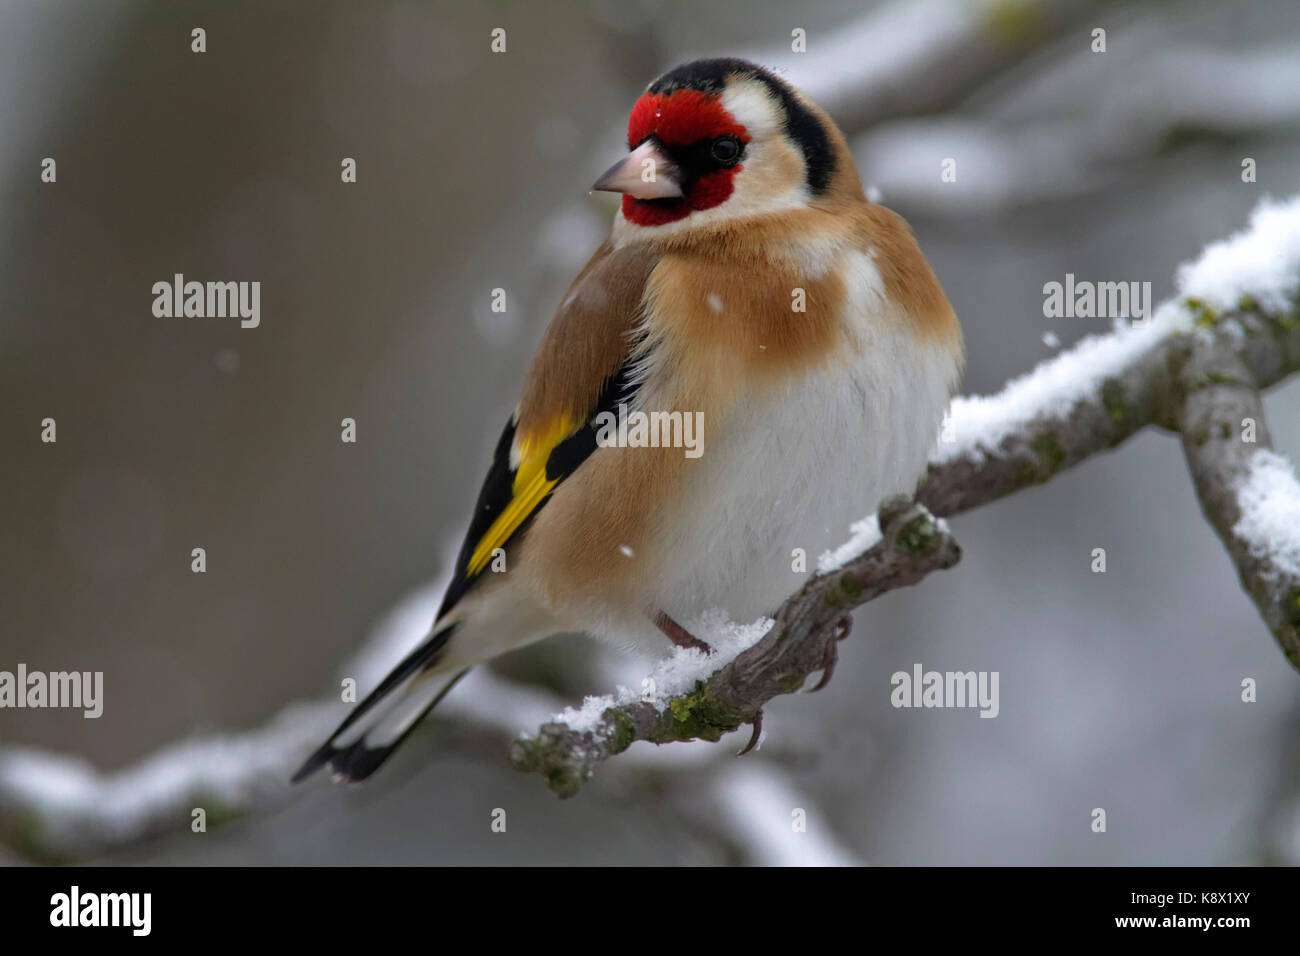 European goldfinch perched on the branch in winter Stock Photo